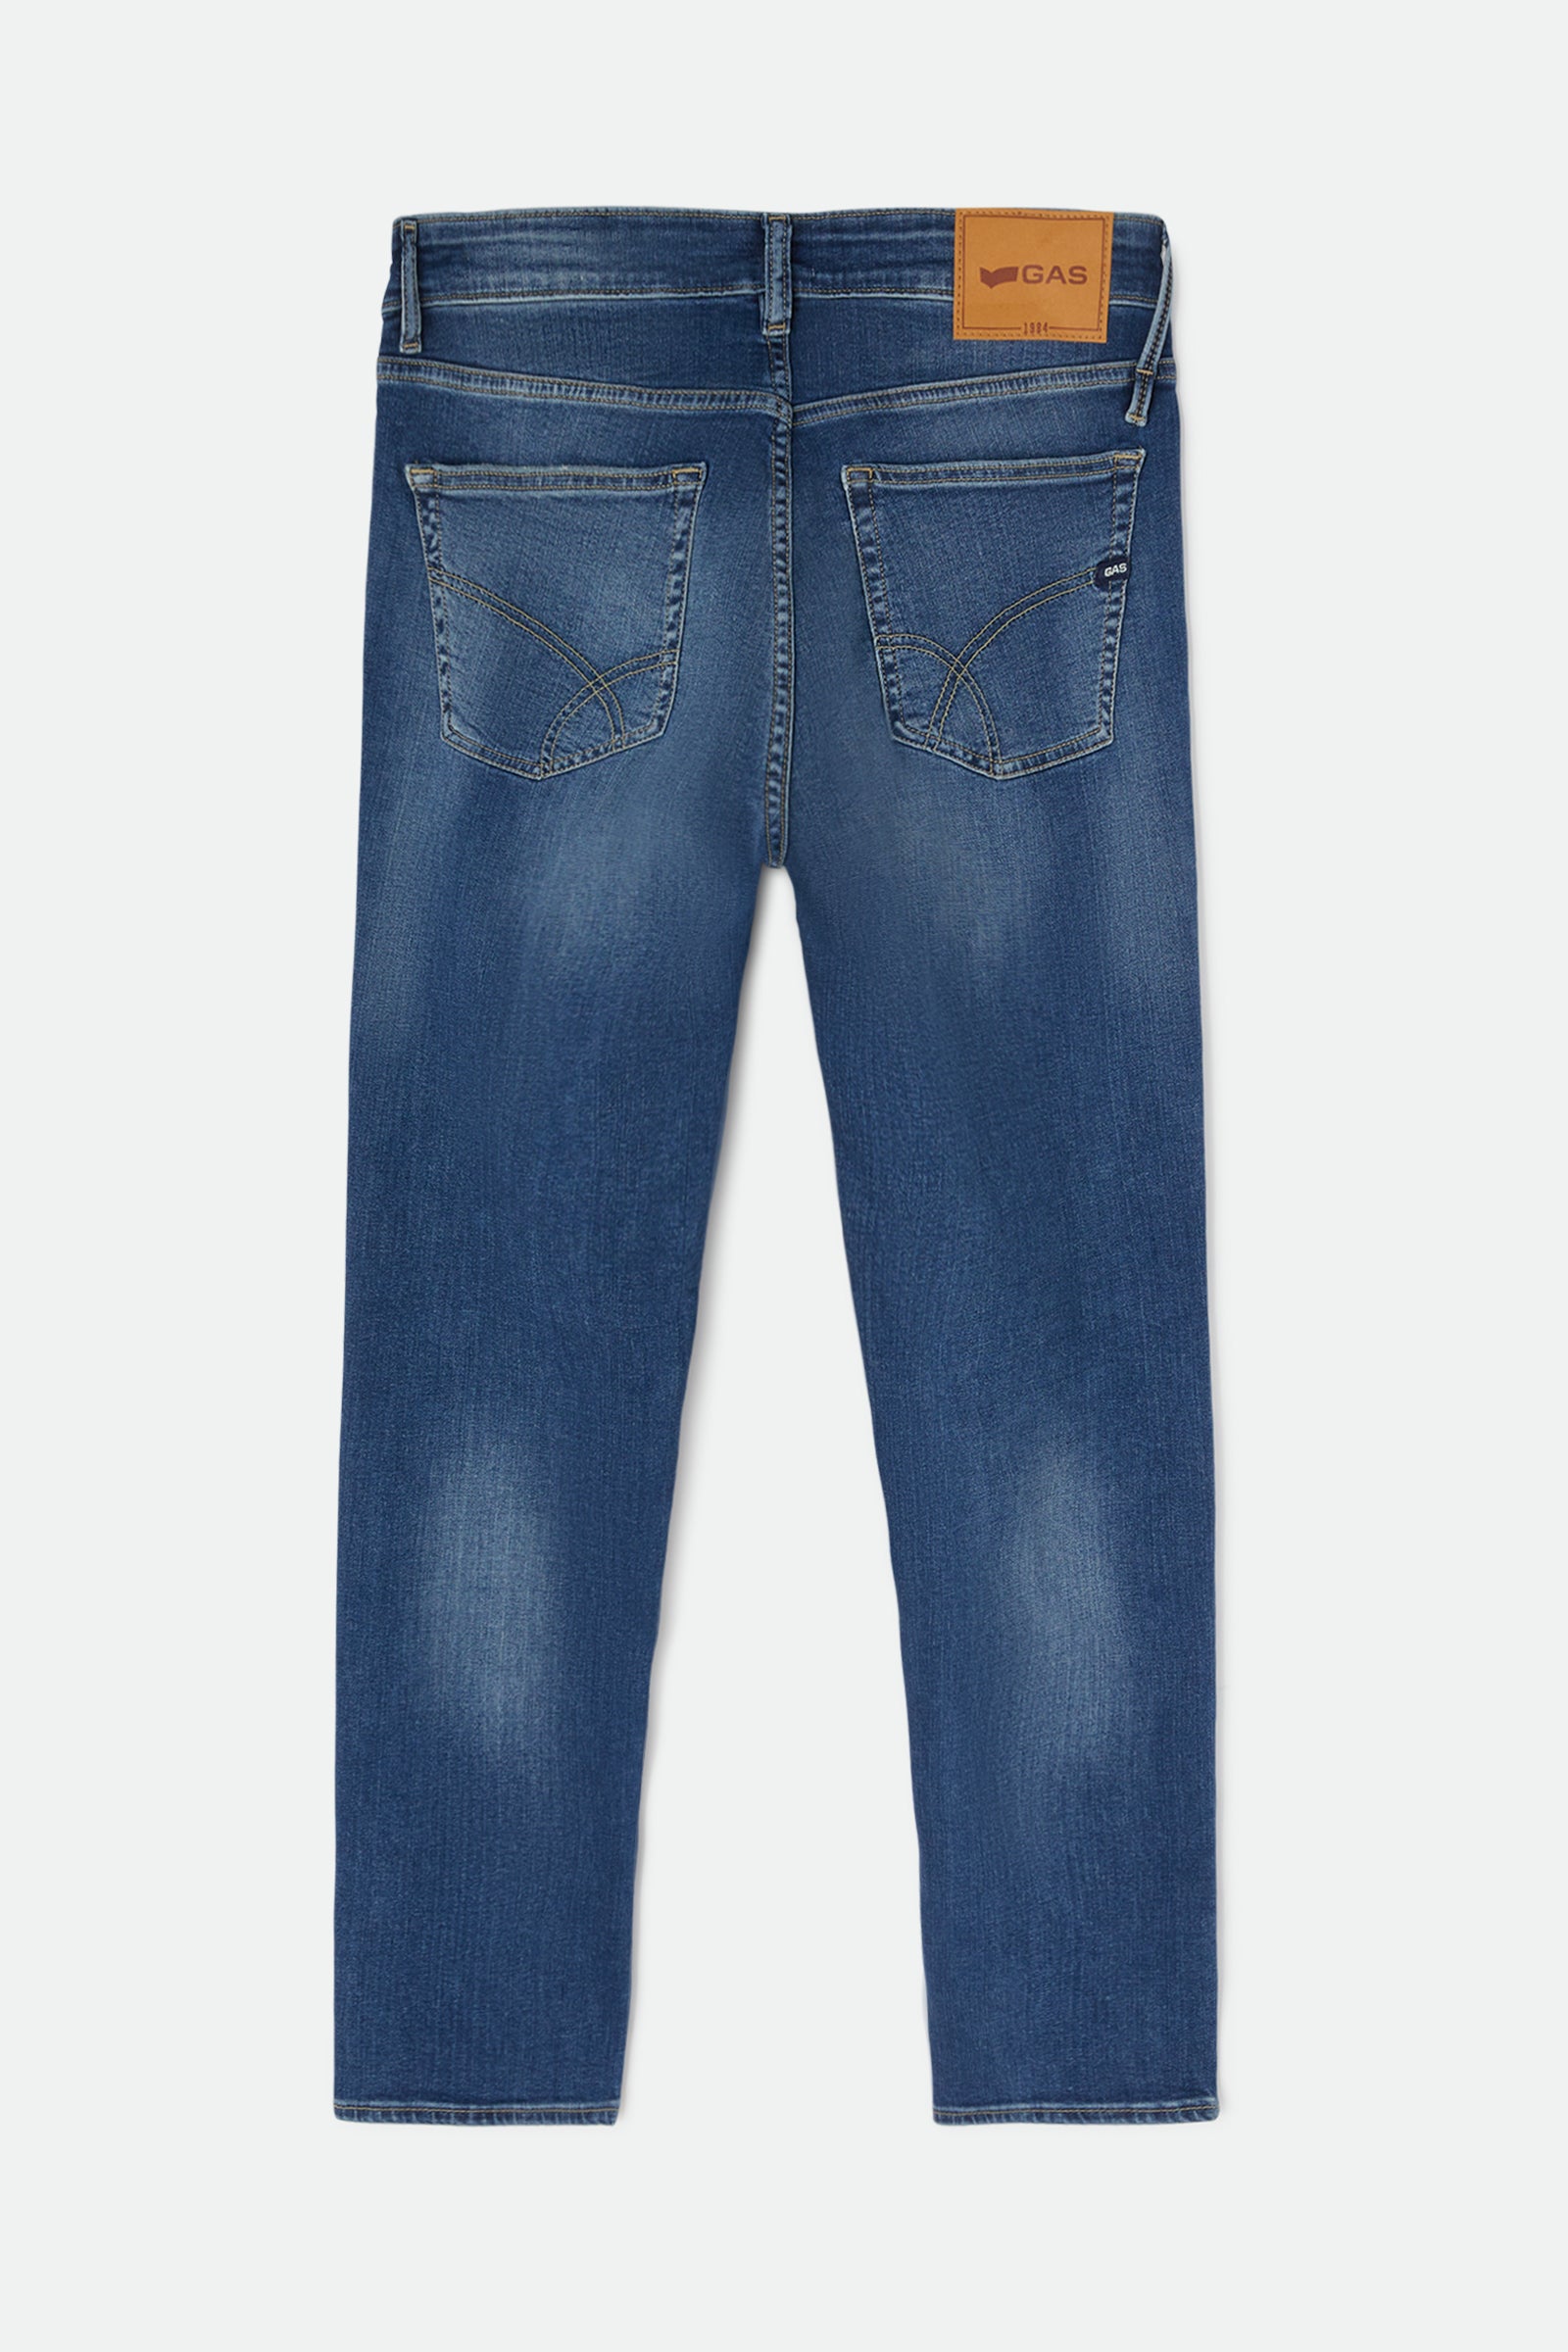 Men's Jeans: Slim, Straight, Carrot | Clothing - Gas Jeans – GAS Jeans